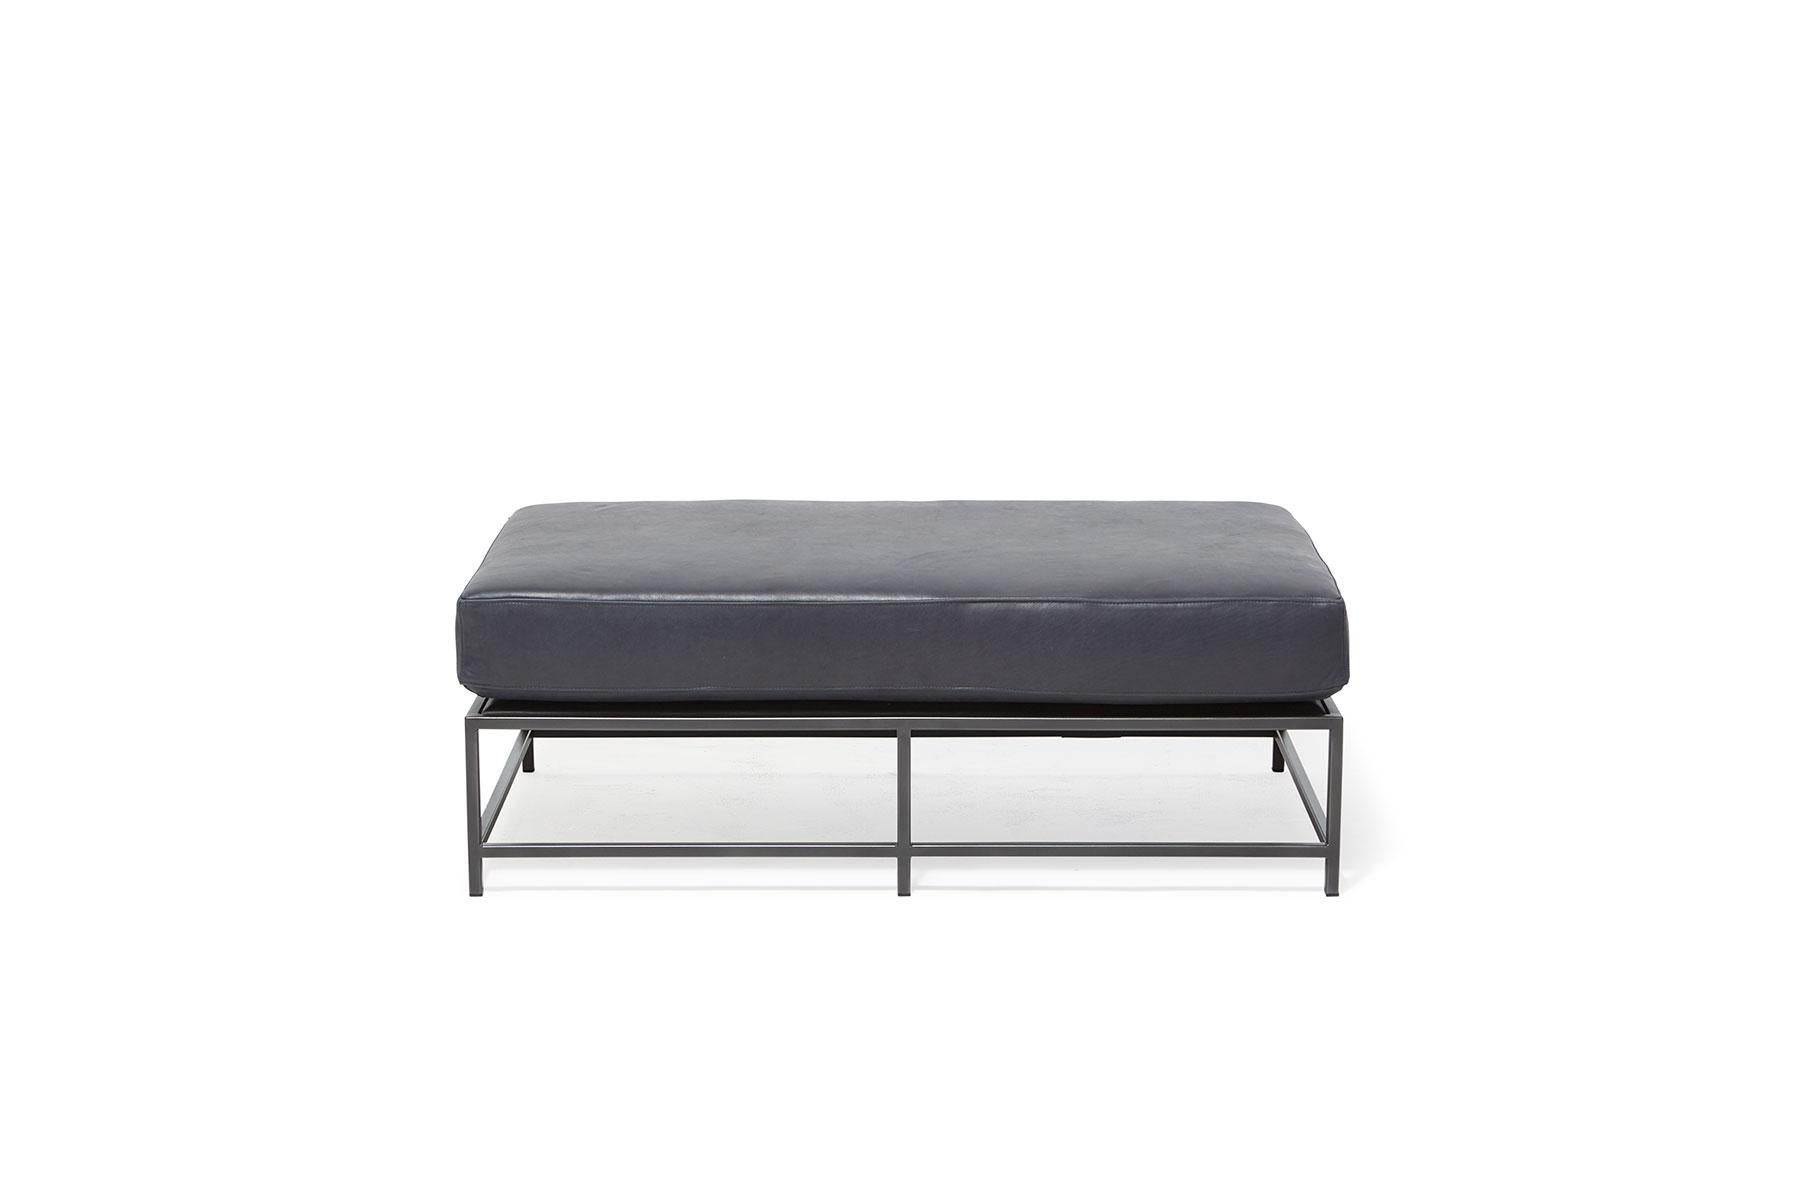 The Inheritance Bench is a versatile piece that can be used as a chaise extension on any sofa, as an independent seating option, or as a large upholstered coffee table. 

This variation is upholstered in a smooth blue leather from the Providence